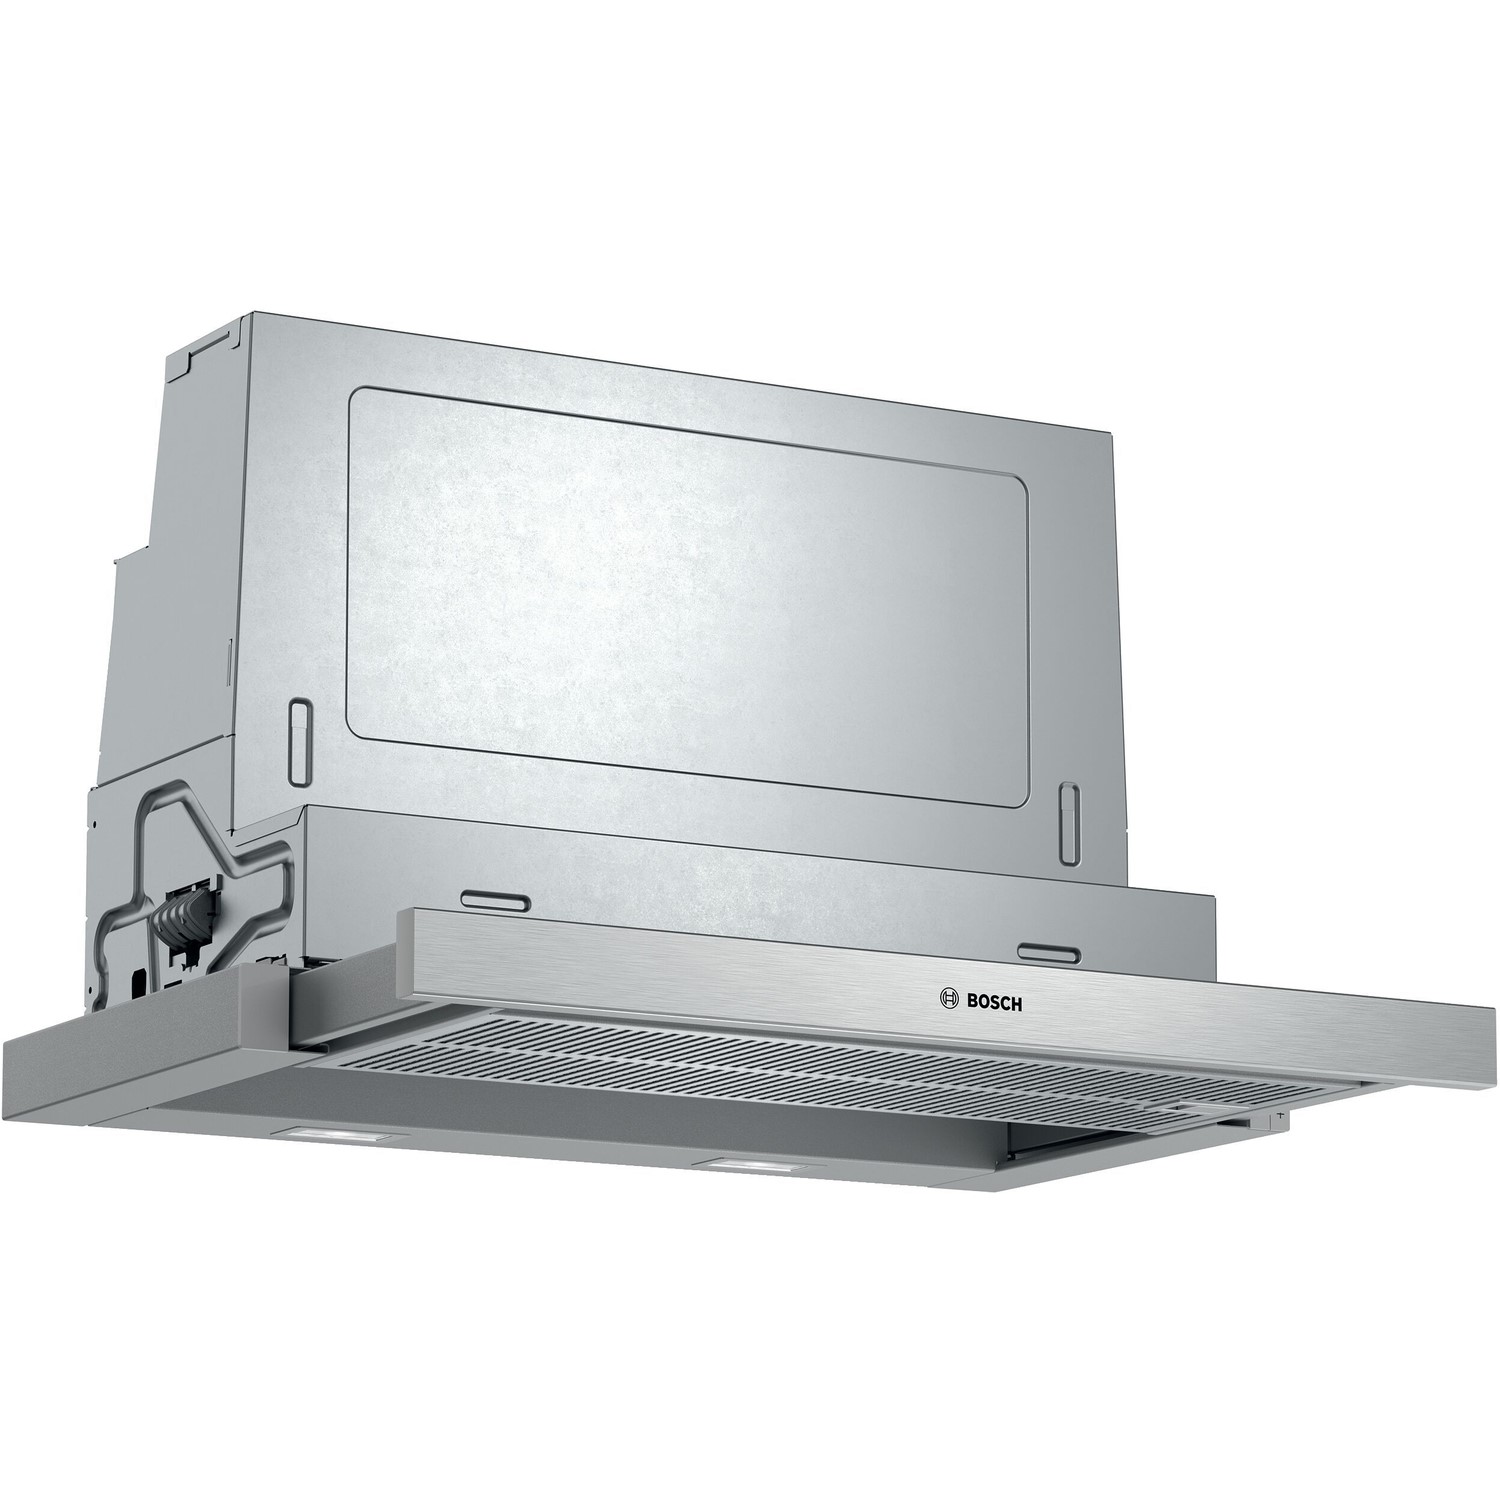 Refurbished Bosch Serie 4 DFS067A51B 60cm Telescopic Canopy Cooker Hood Stainless Steel